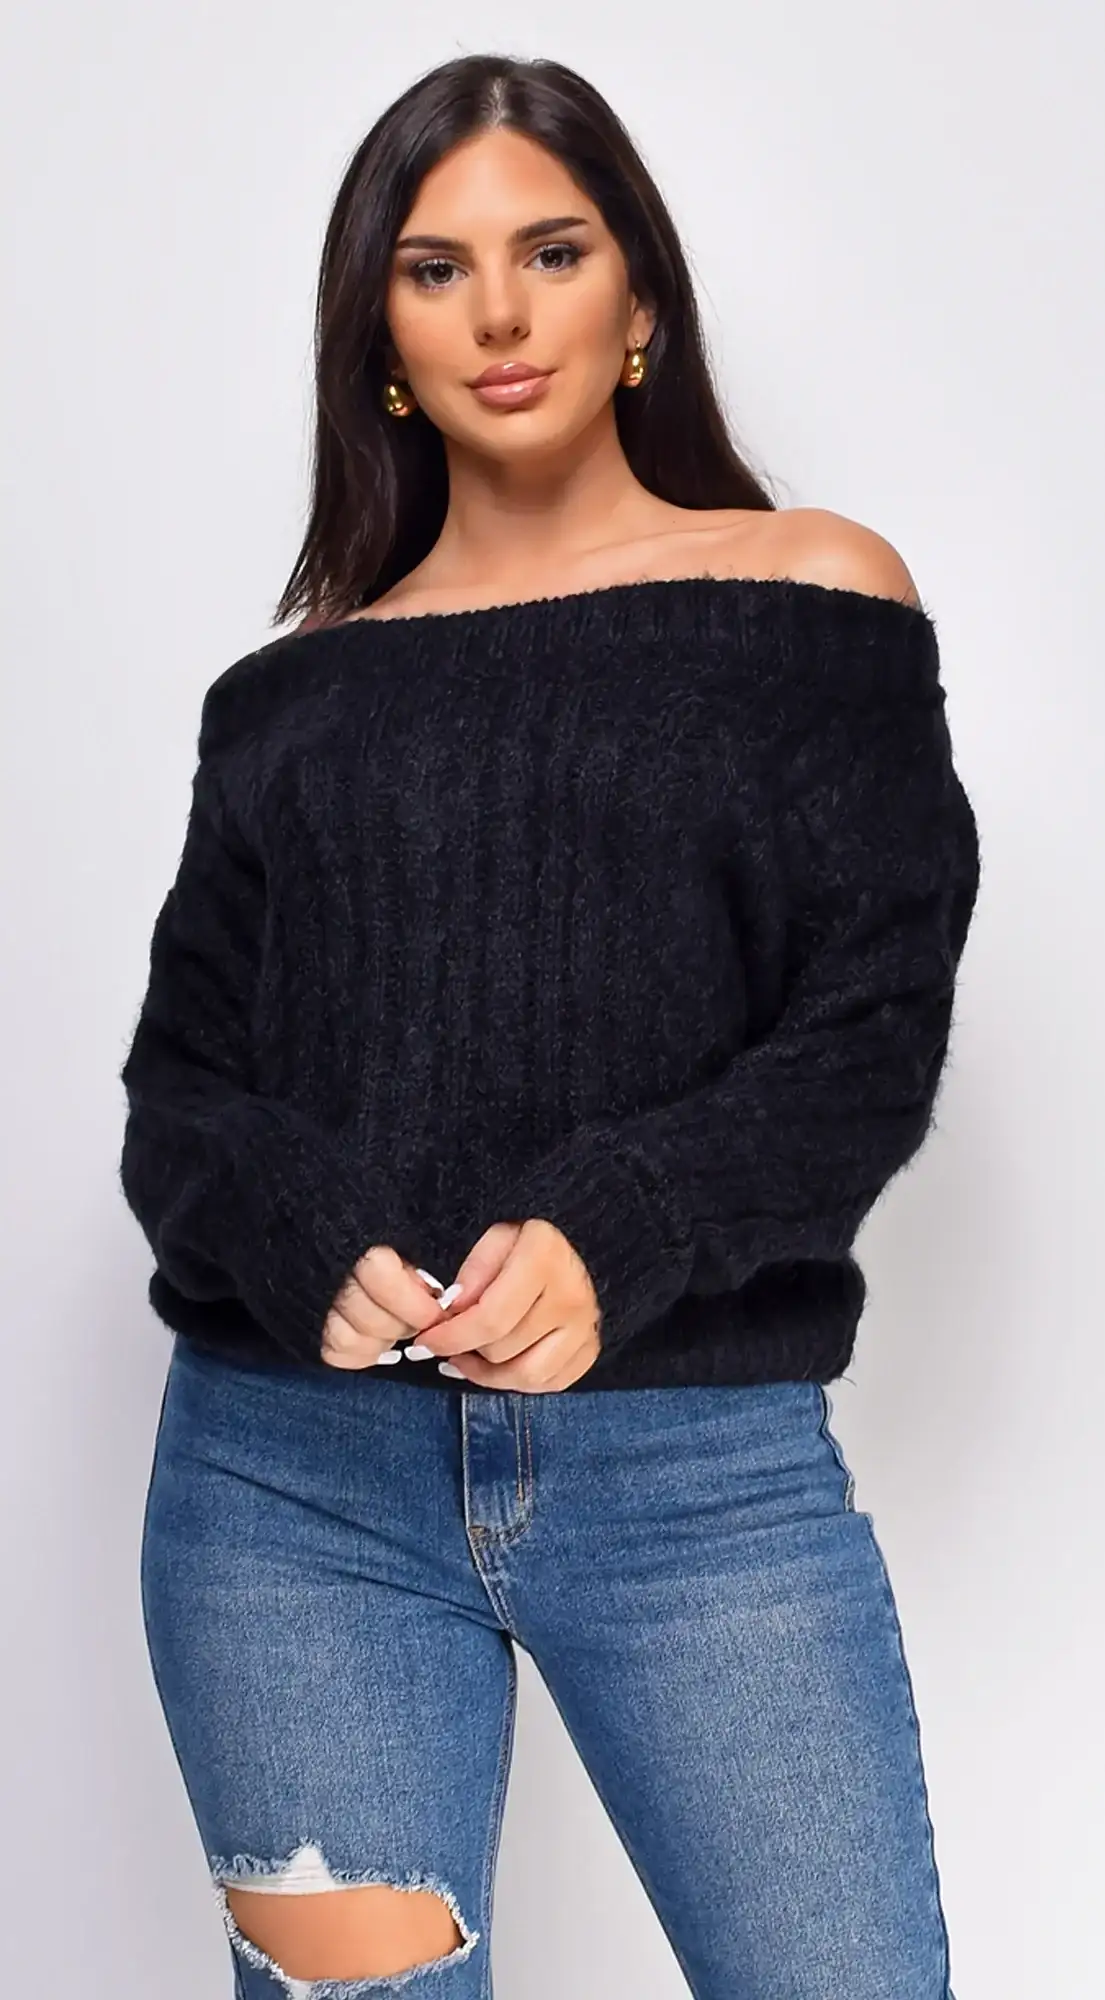 Image of Iliana Black Off Shoulder Braid Cable Knit Sweater Top